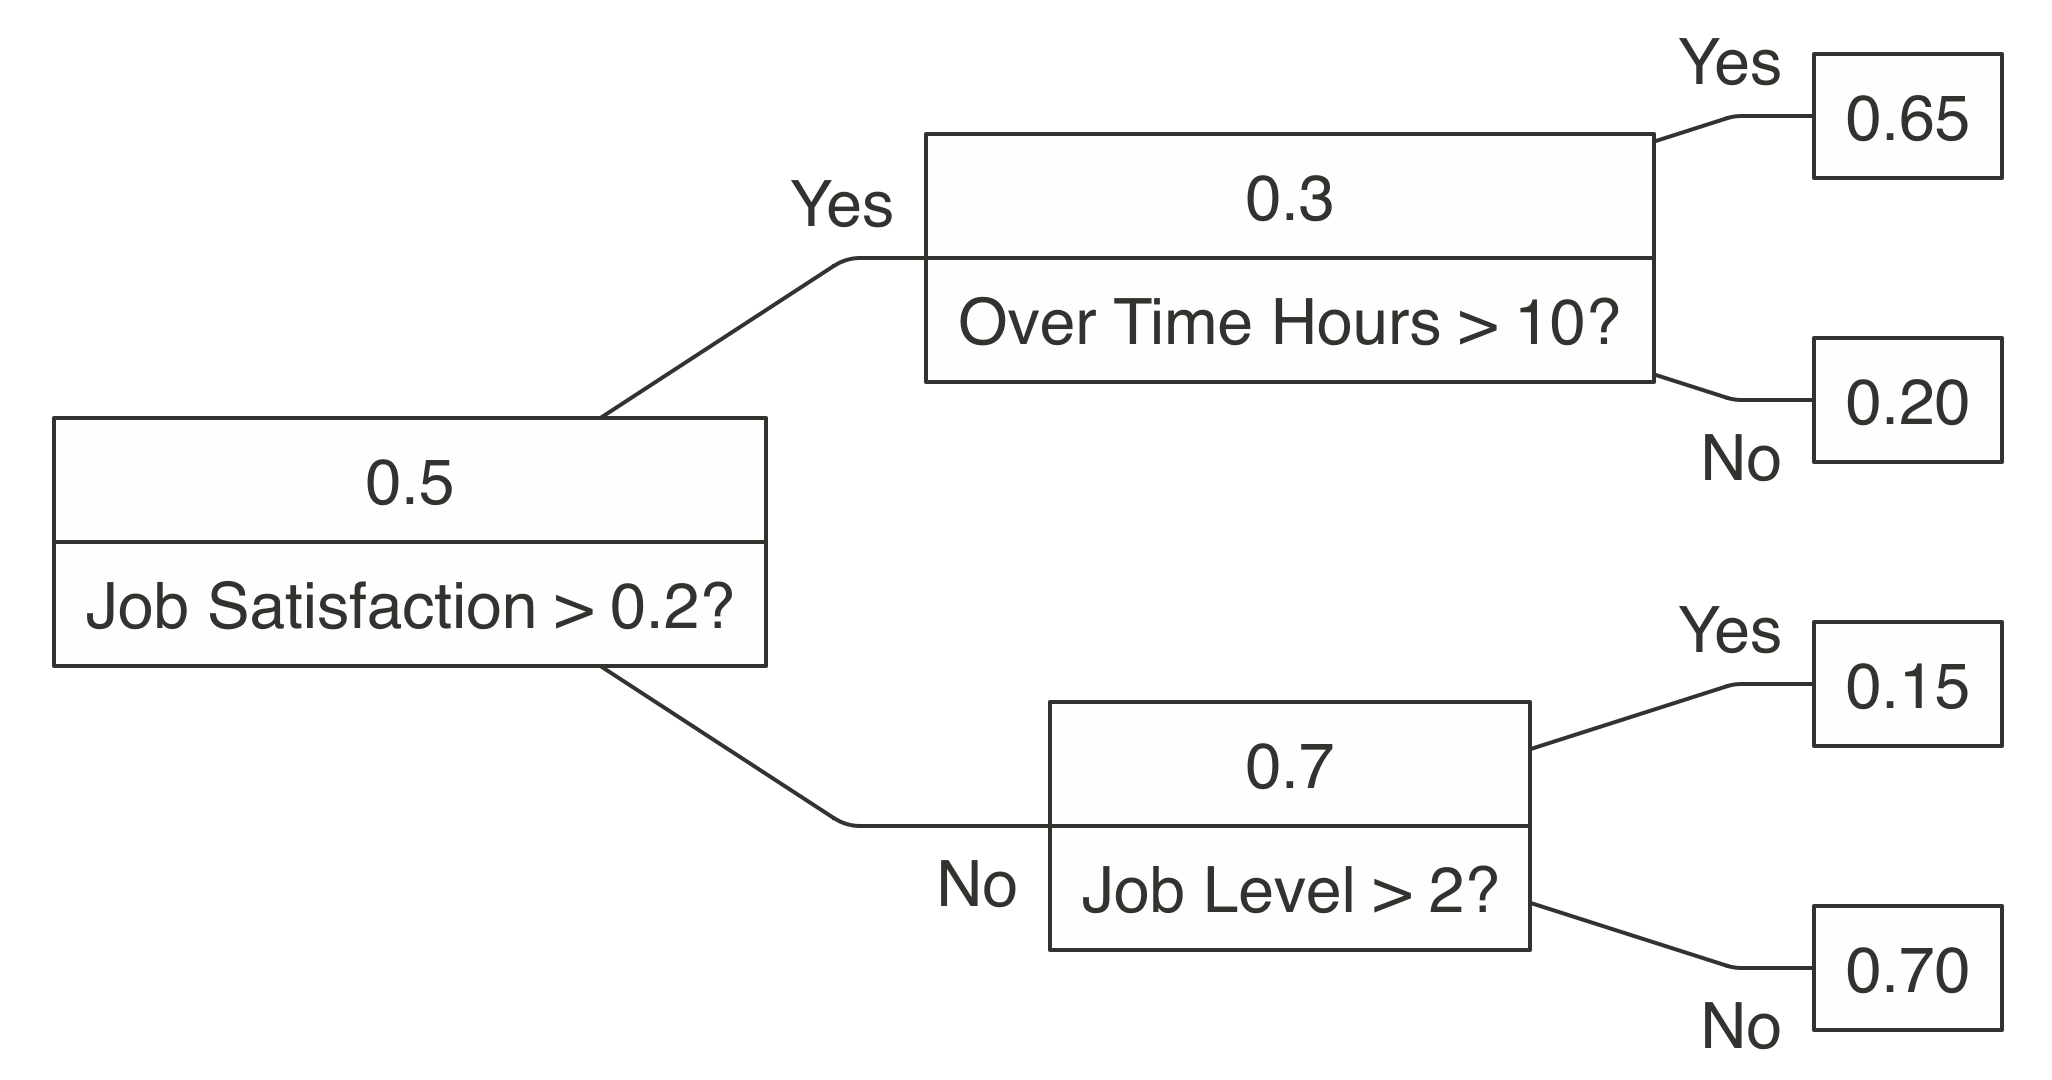 A decision tree to predict job attrition based on known factors